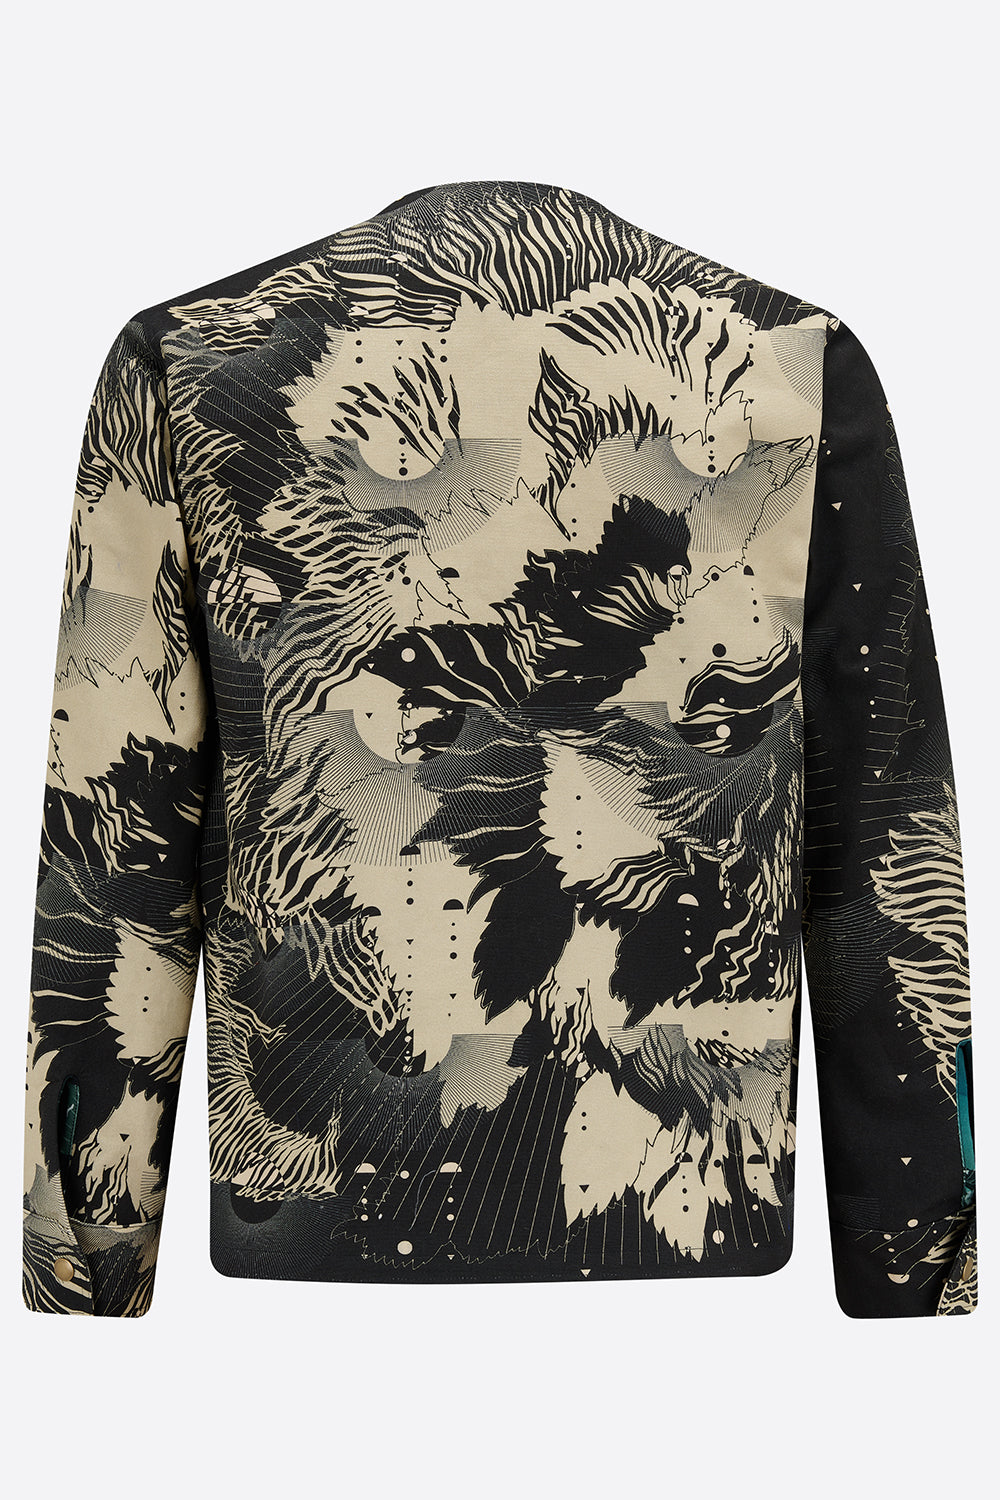 The back of a cotton mens utility jacket with a navy and cream abstract floral print